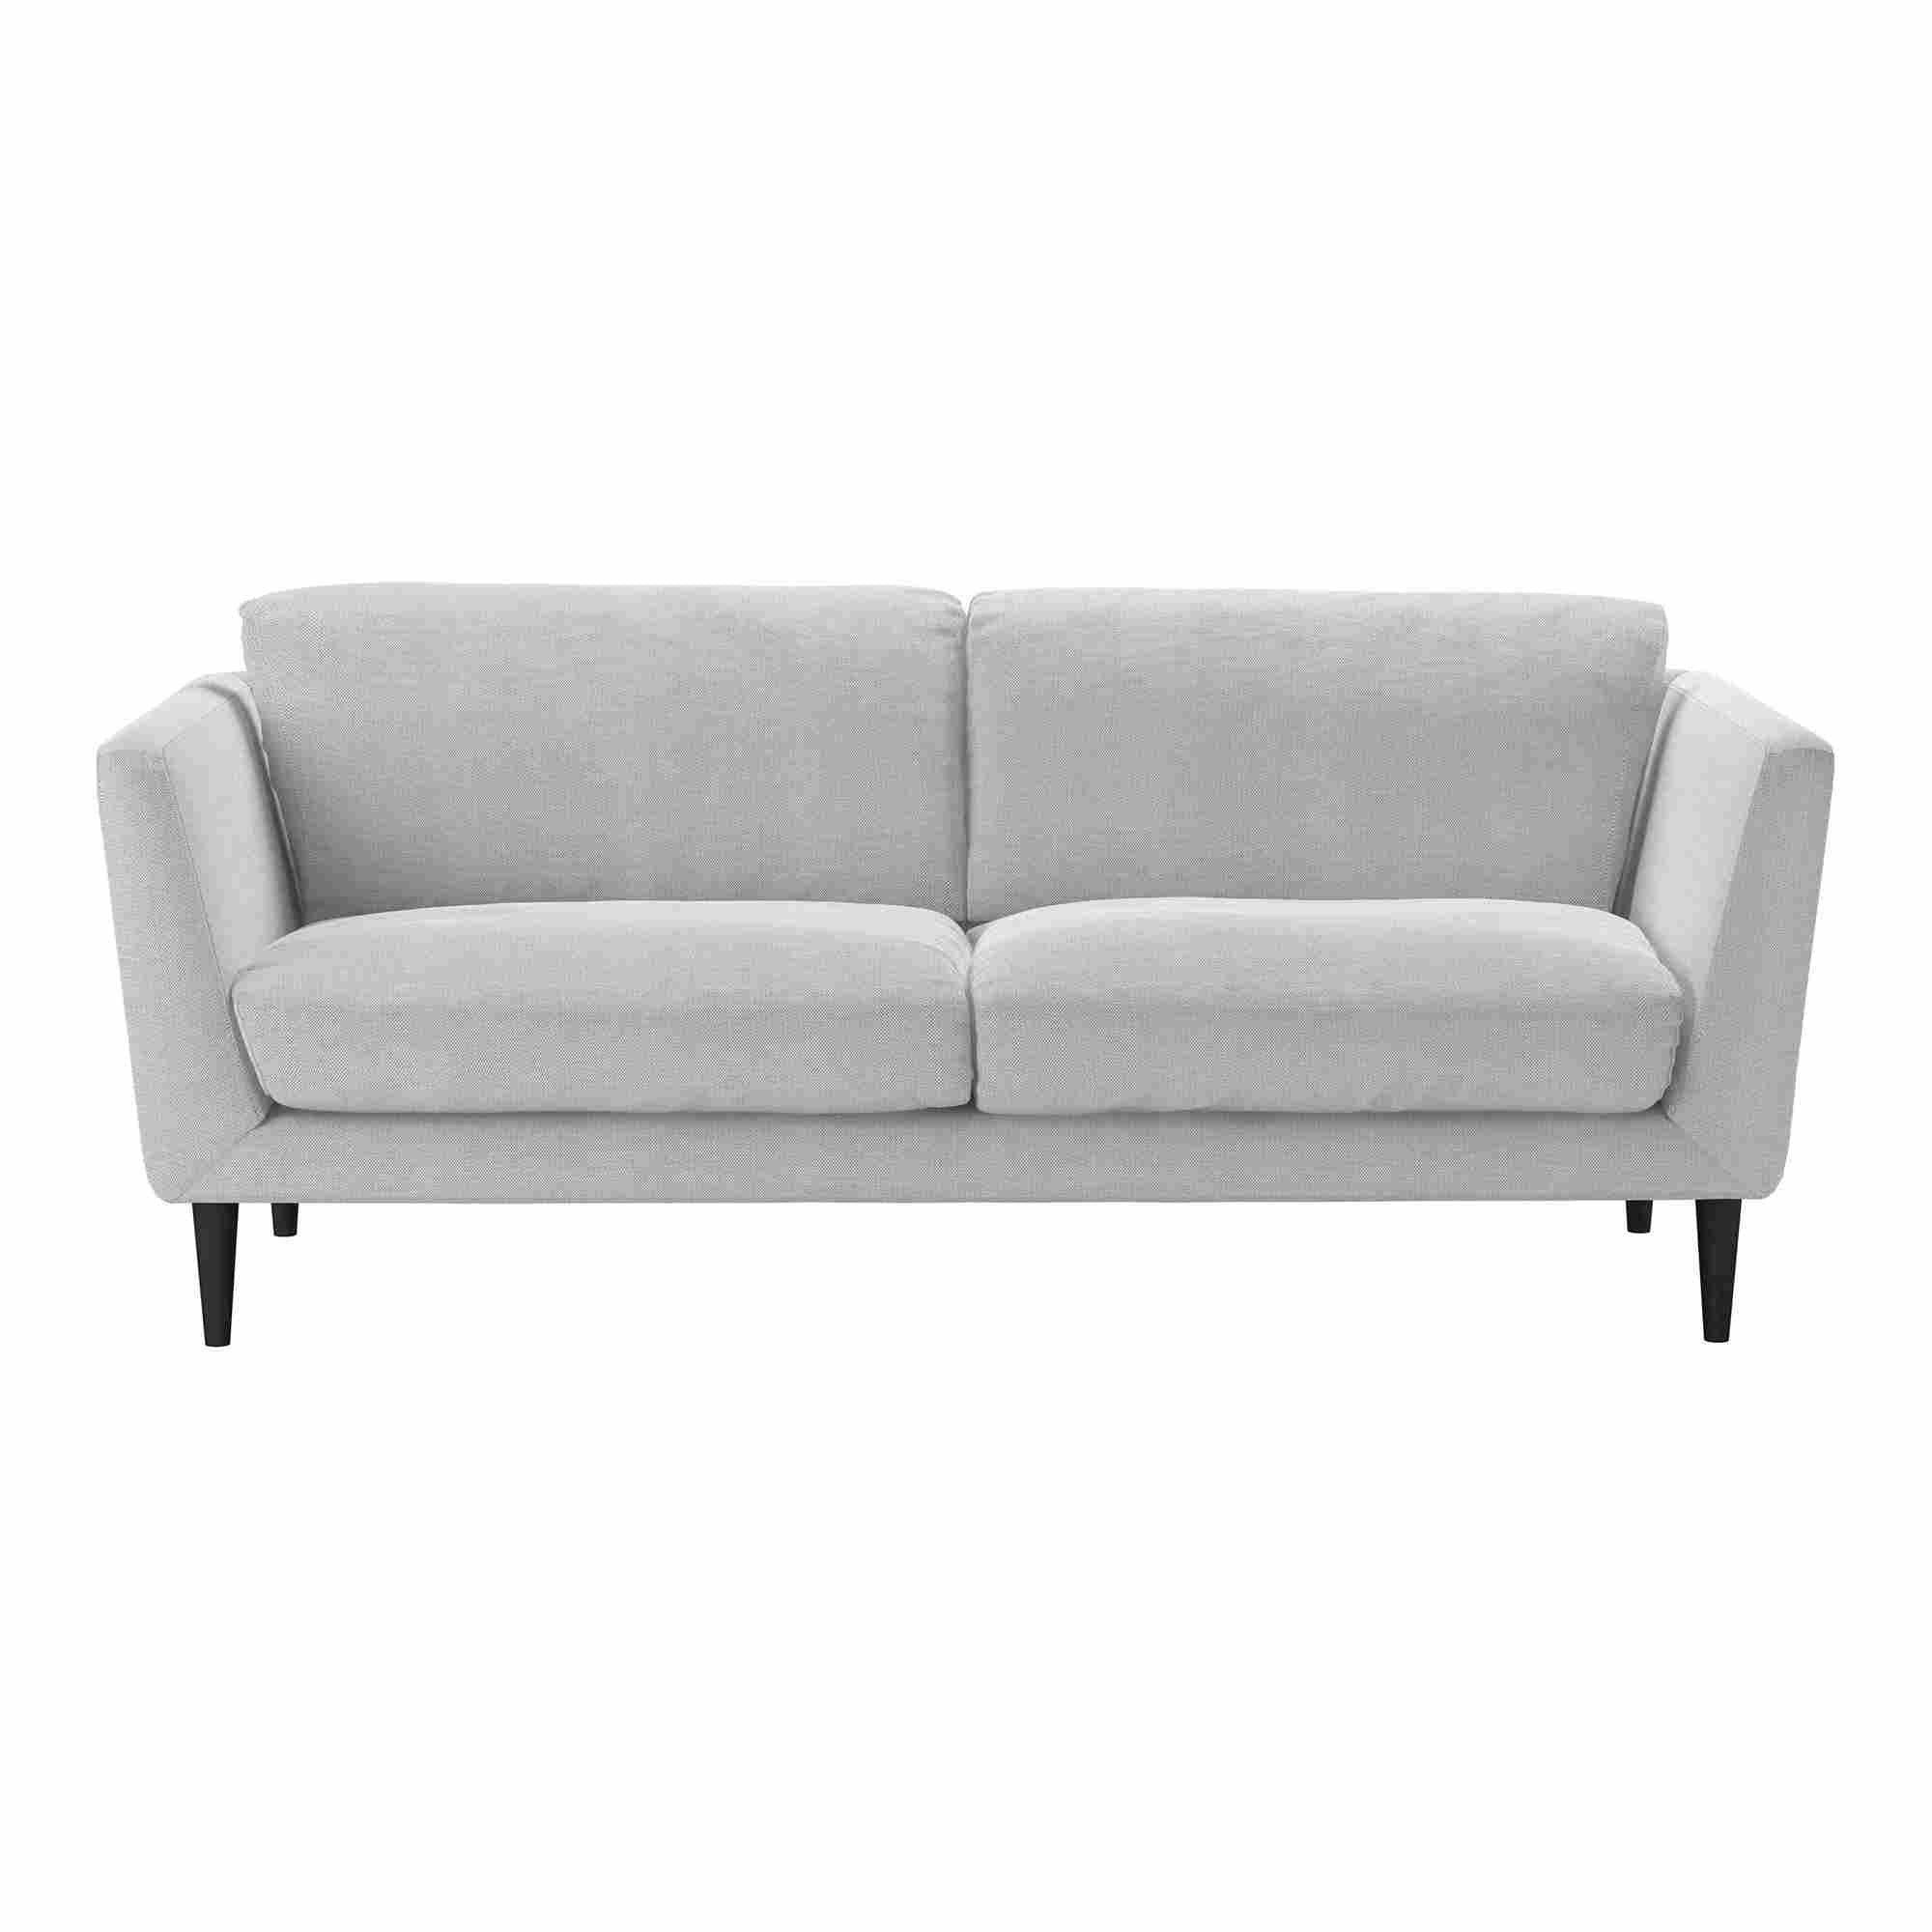 Holly Pumice House Basket Weave Sofa - 2.5 Seater